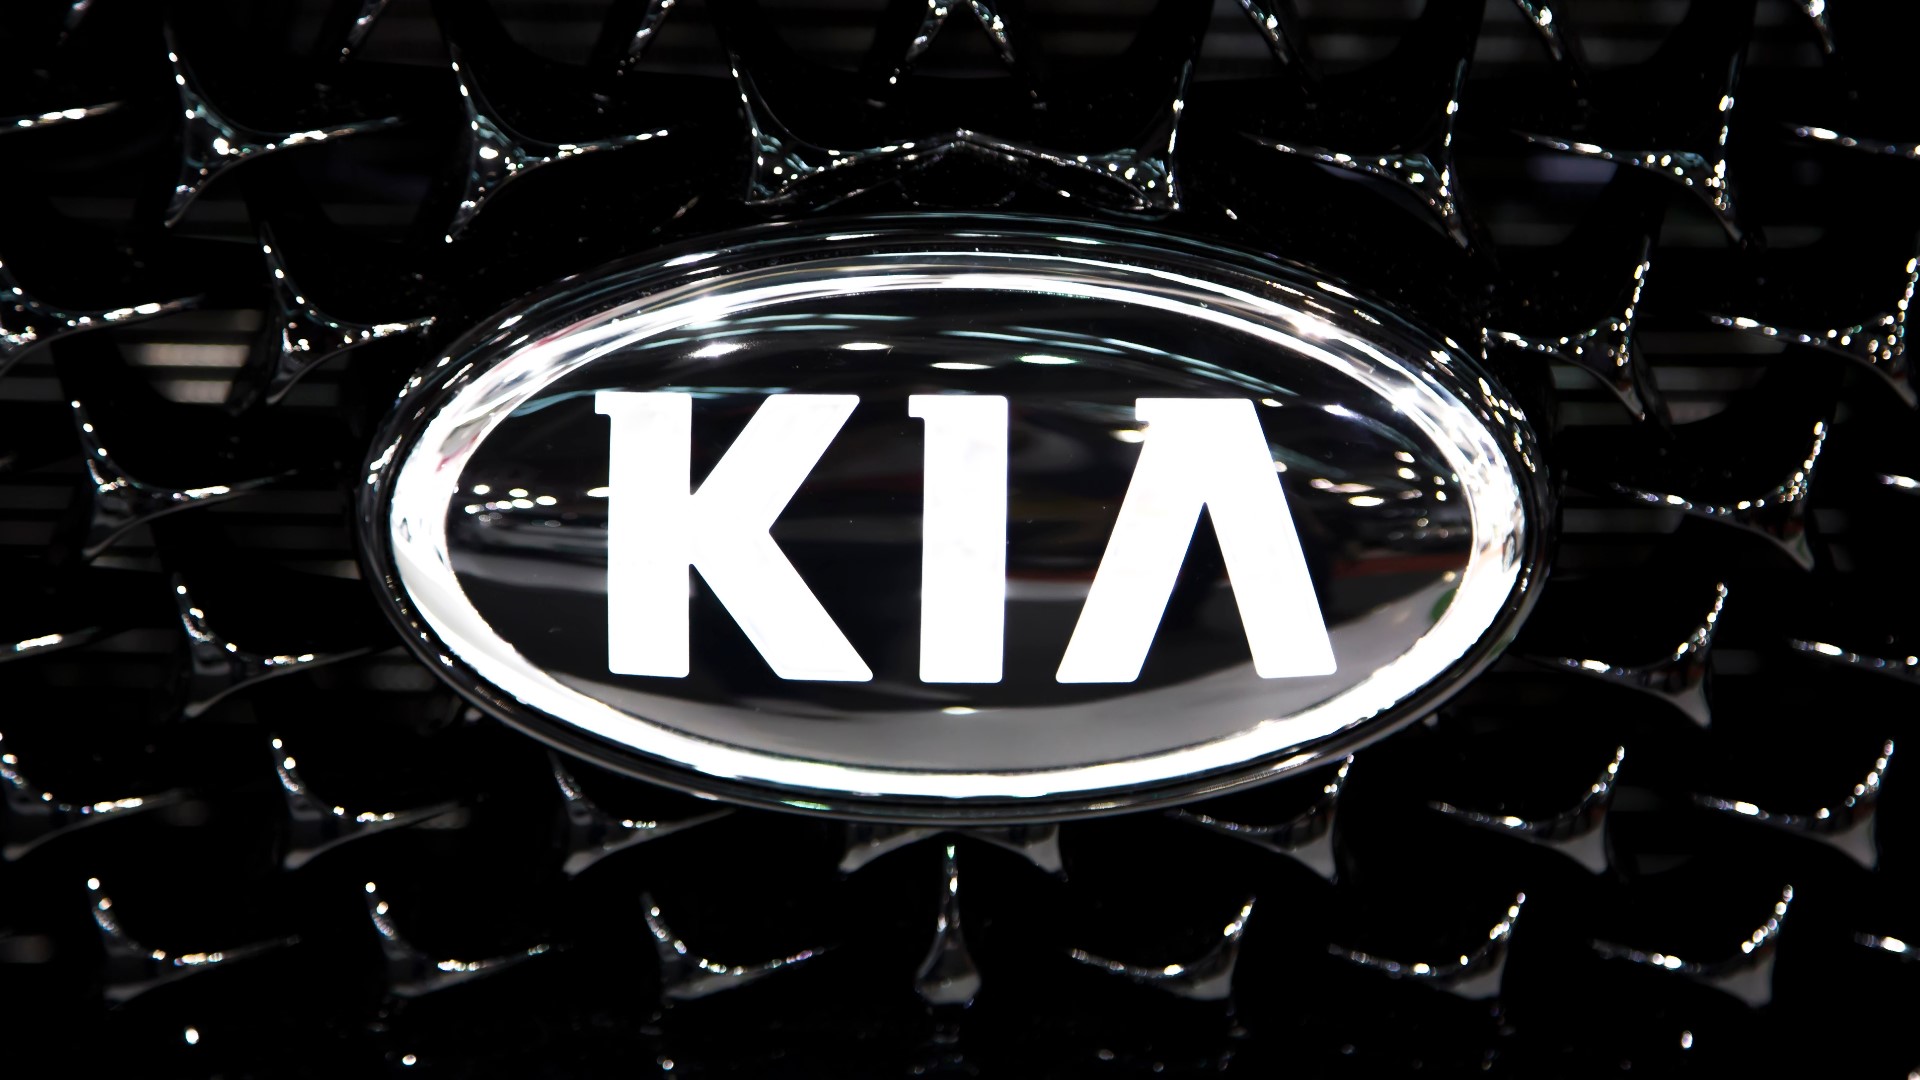 KIA will be holding anti-theft clinics in the St. Louis area. One will be at Busch Stadium and another will be at the Chesterfield Mall.